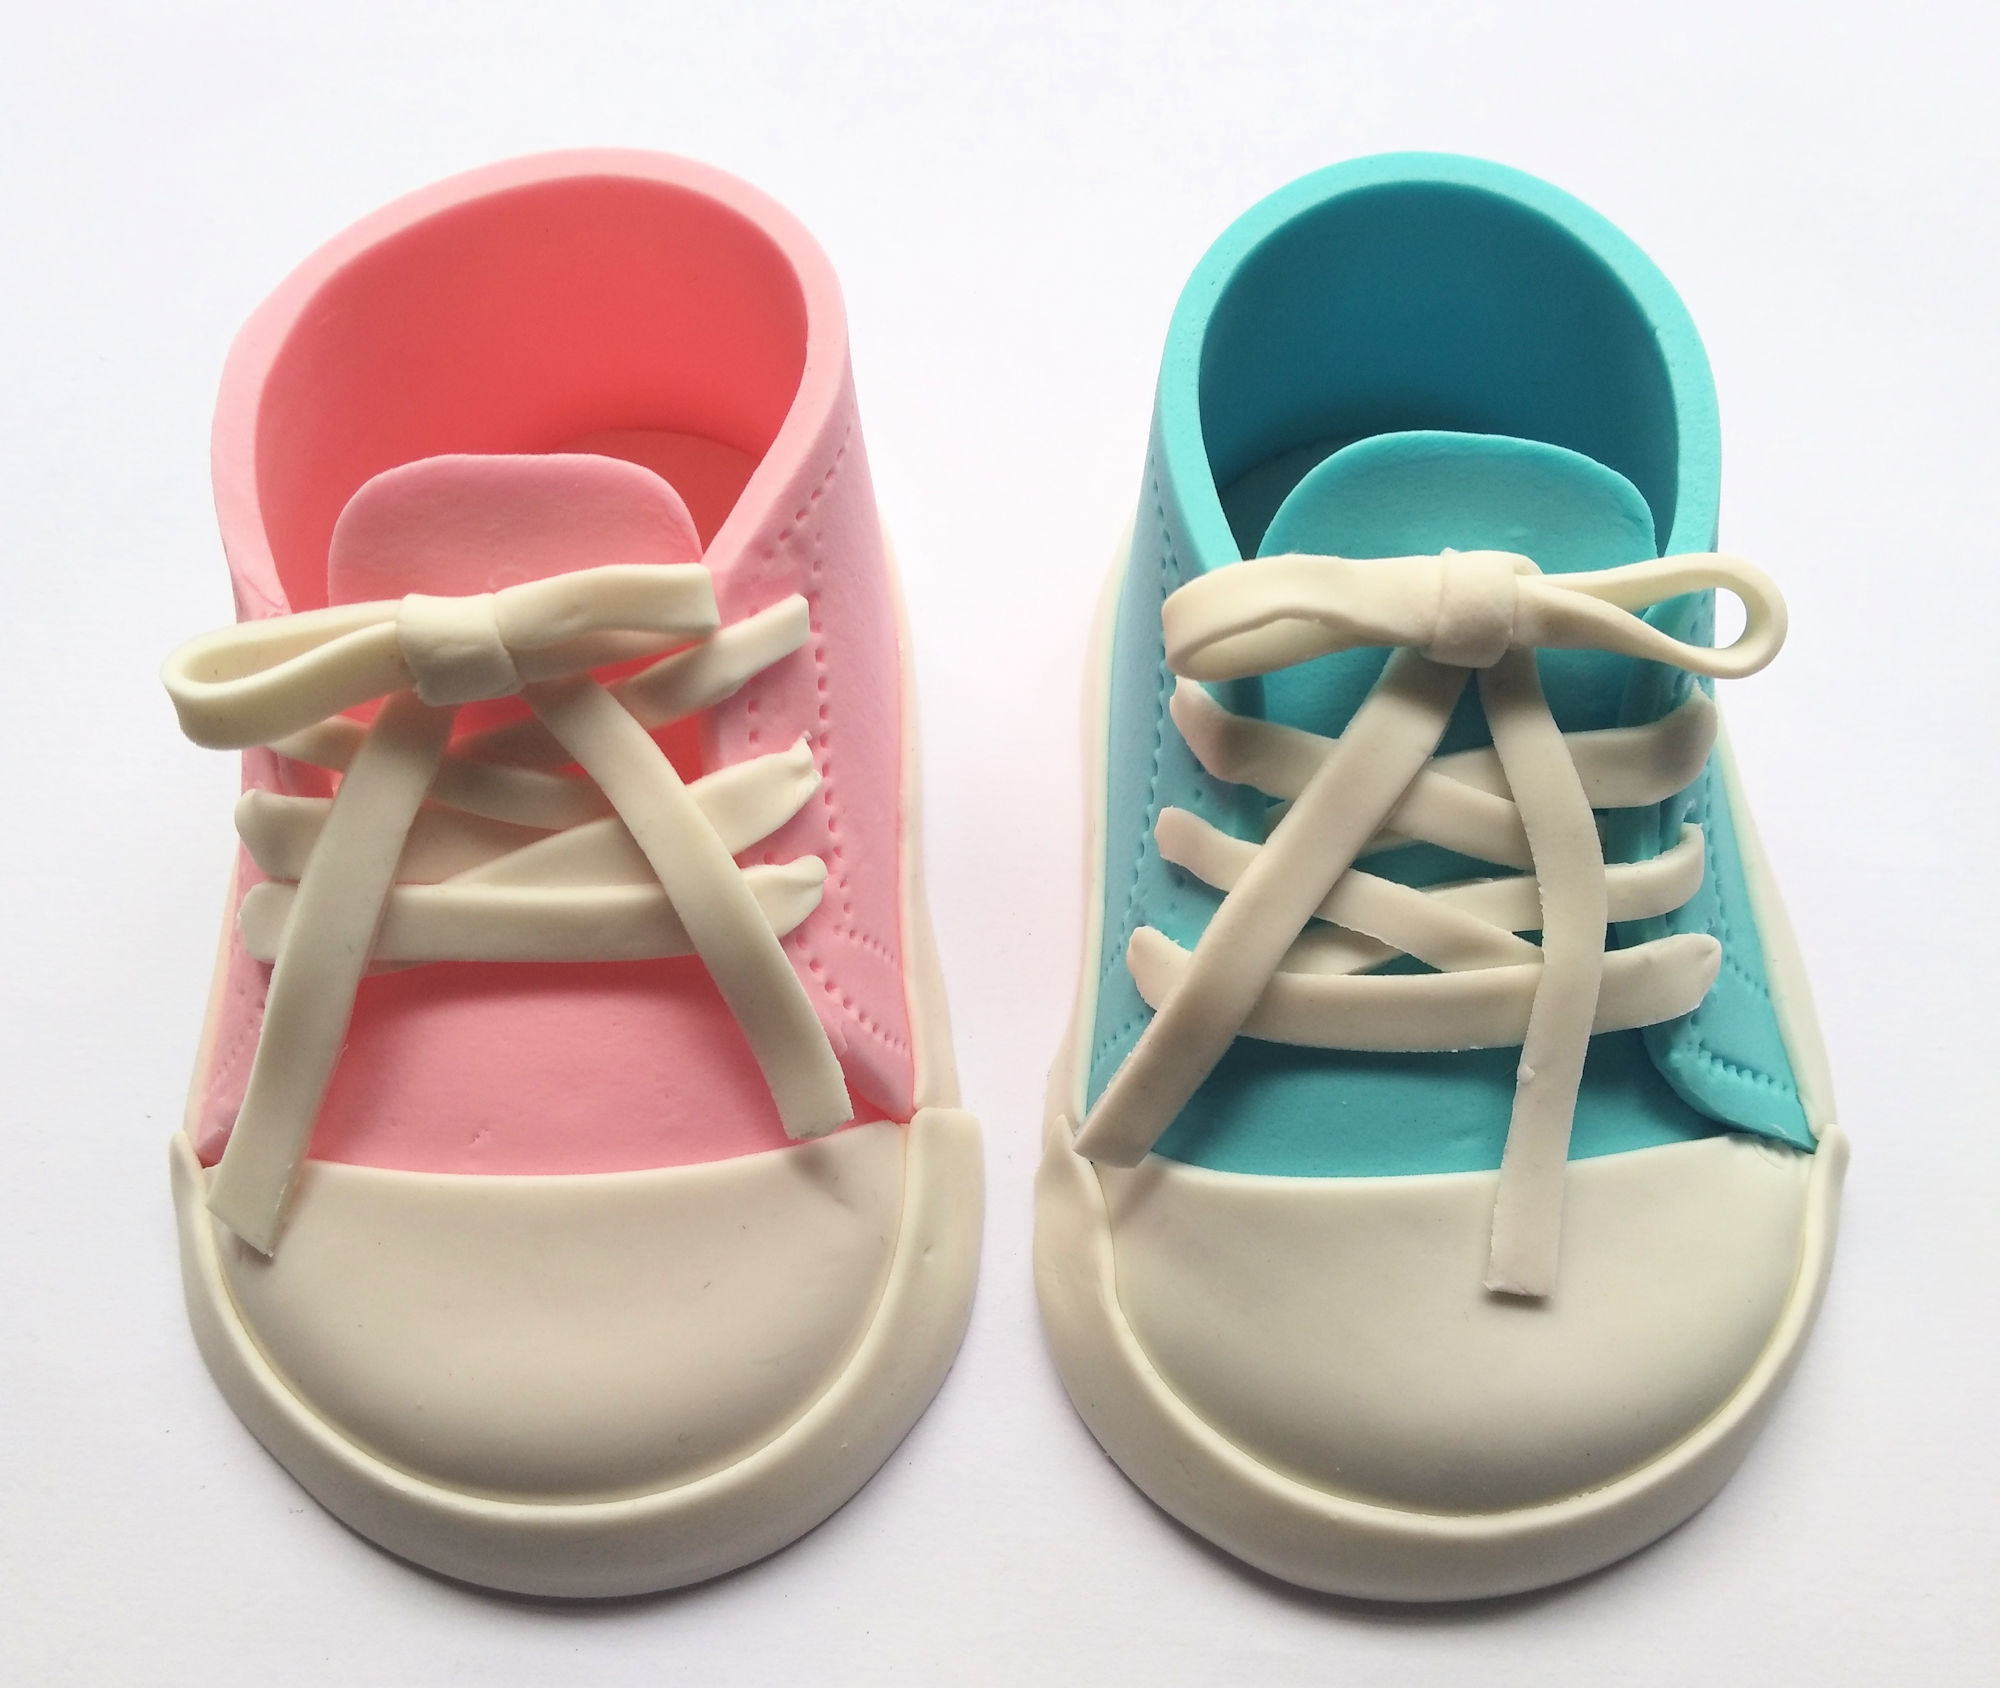 & Celebrations :: Party :: Cake Toppers Fondant gender reveal baby shoes. Edible cake topper